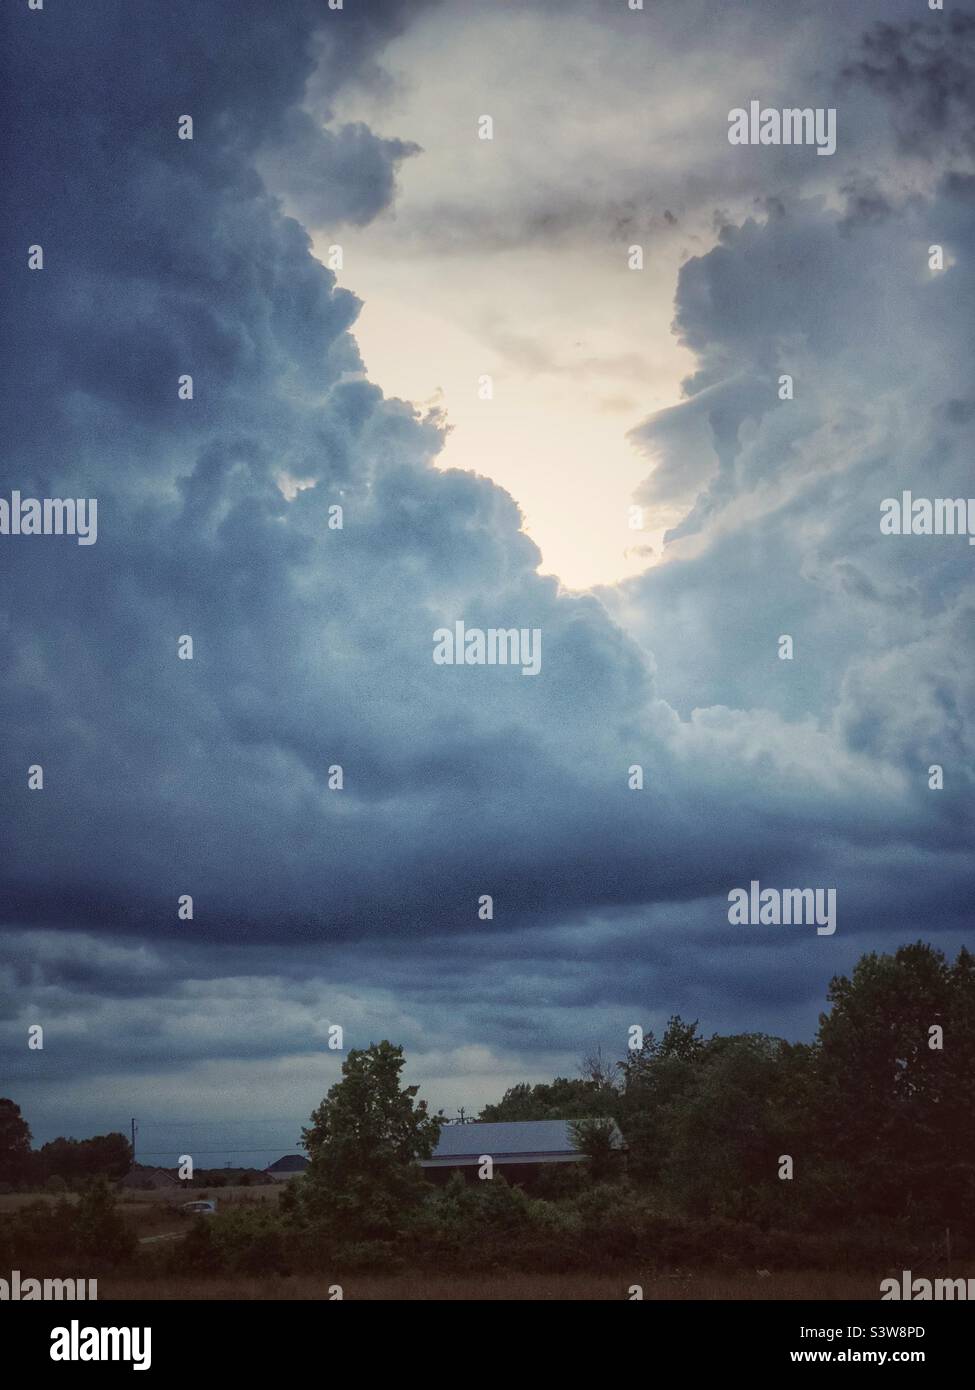 Portal in the sky- storm clouds over North Carolina Stock Photo